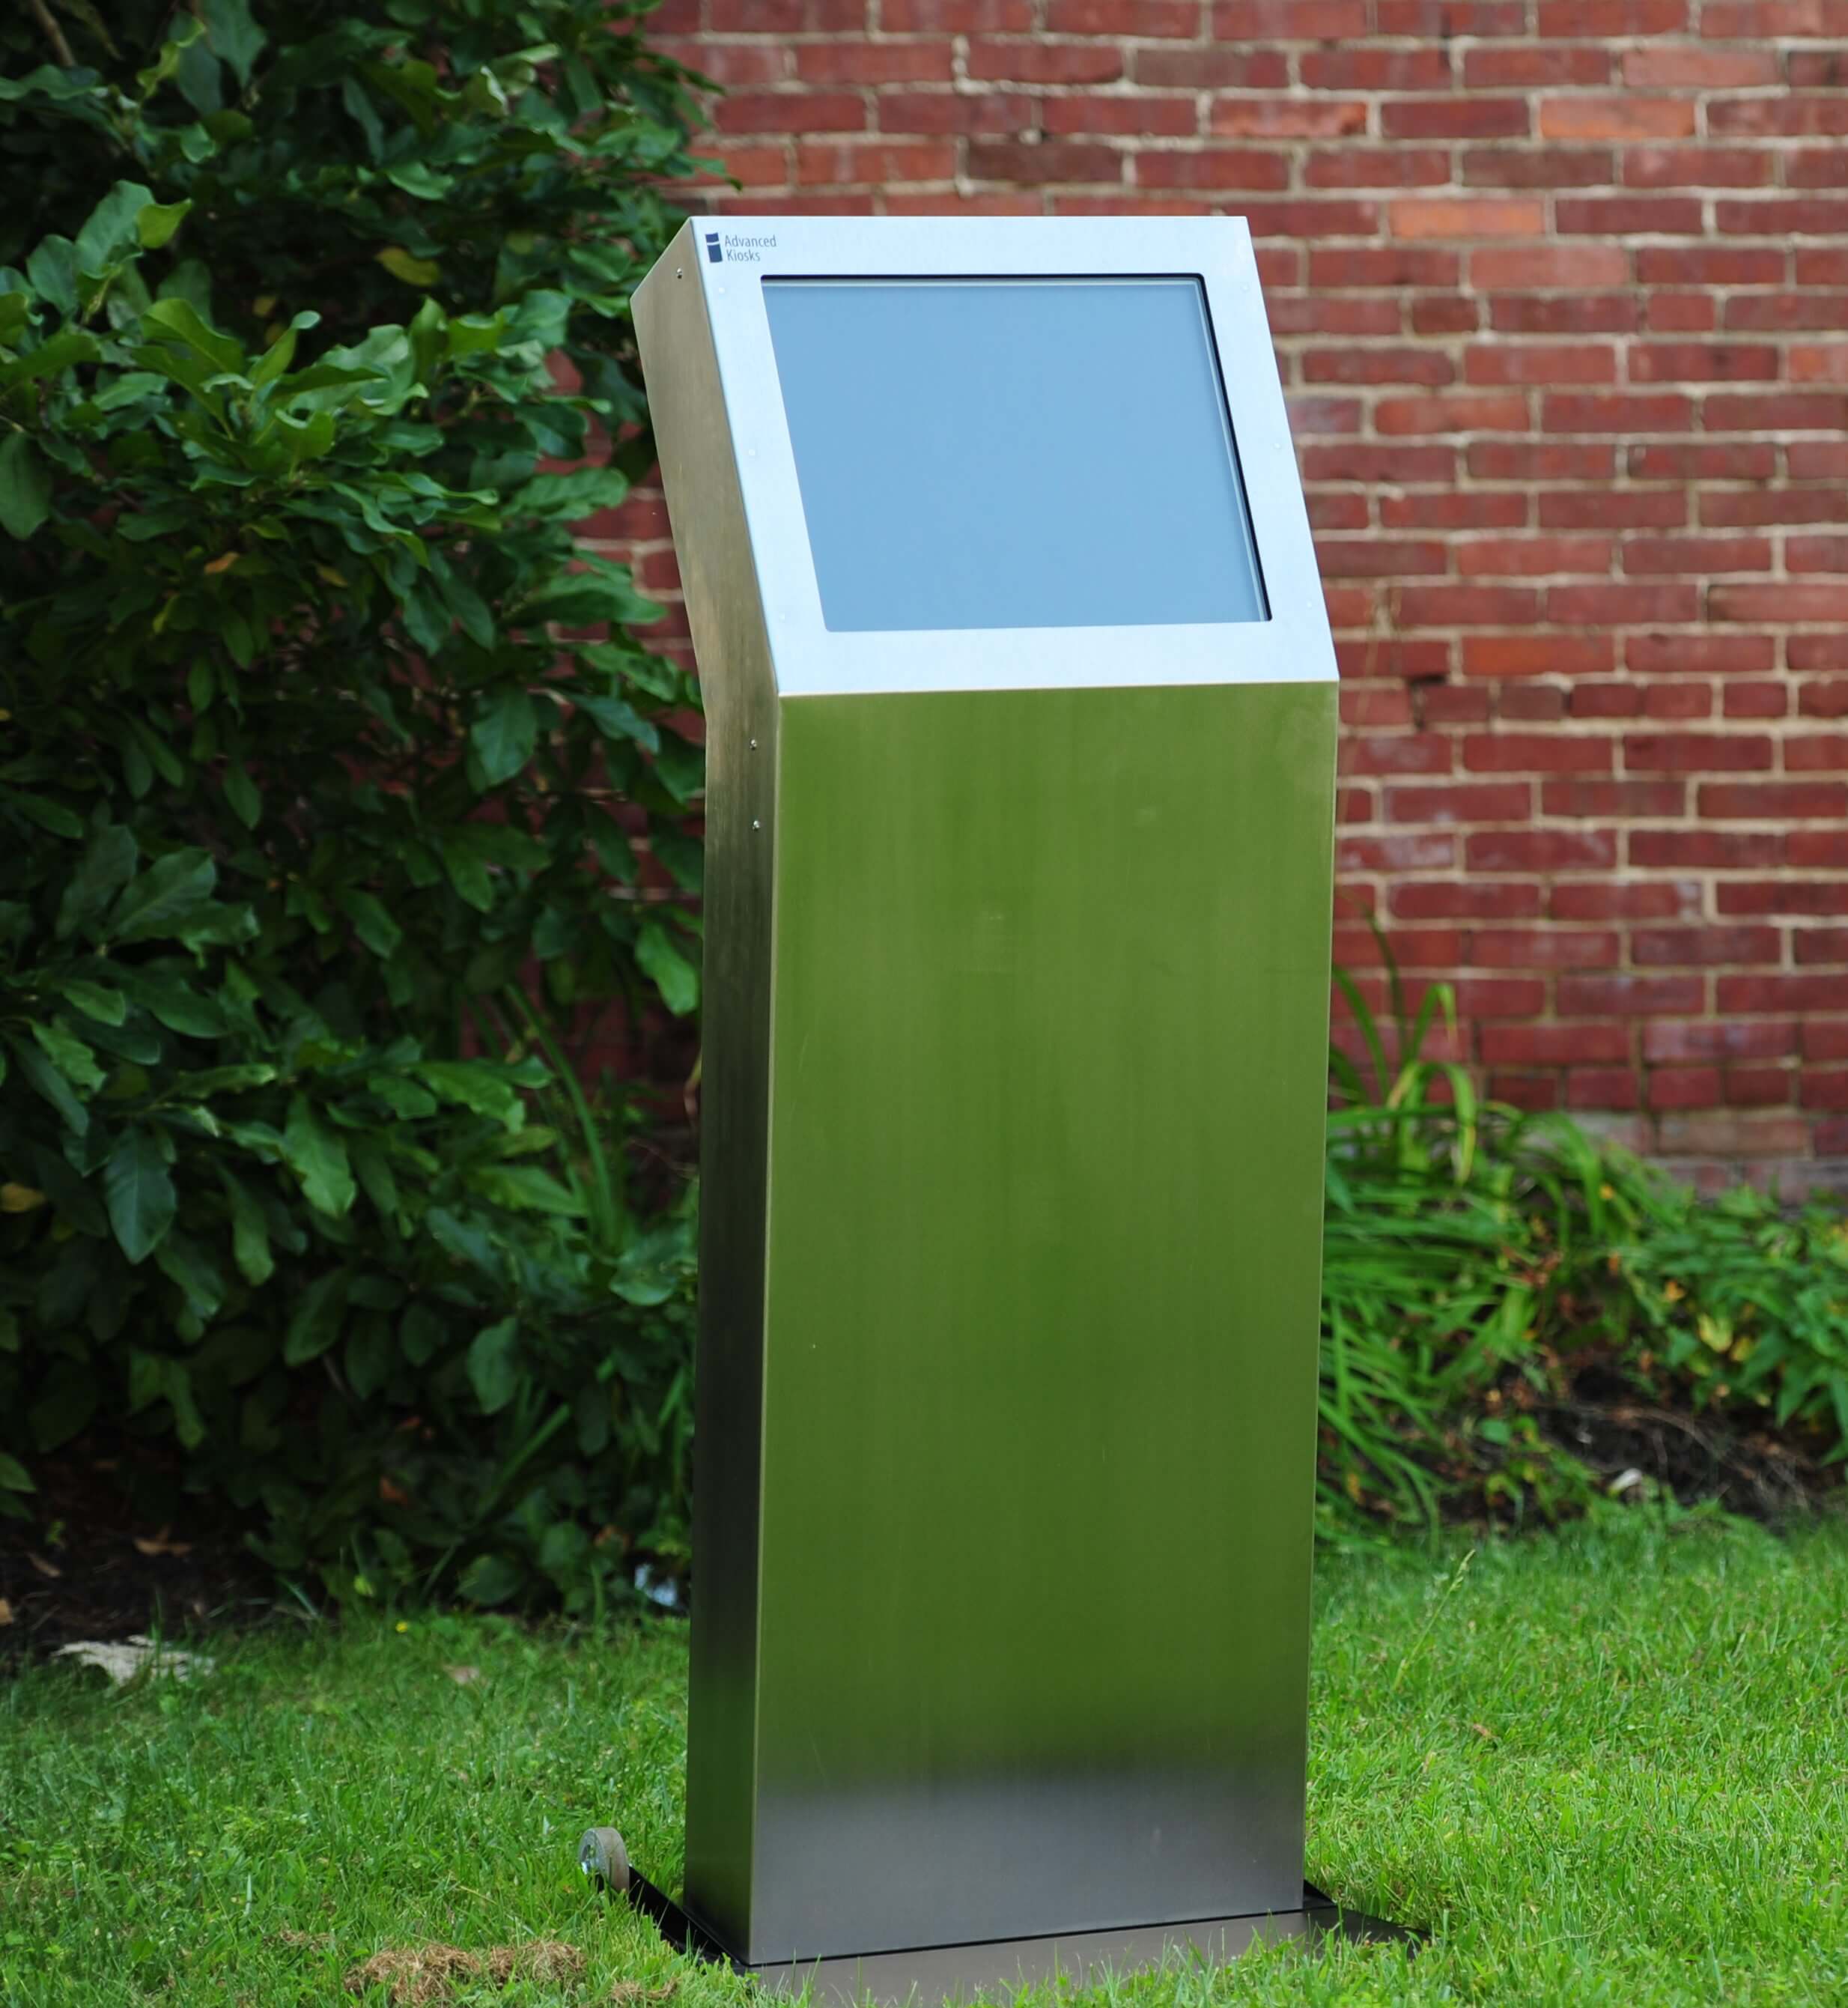 Enviro Kiosk Conquers the Great Outdoors